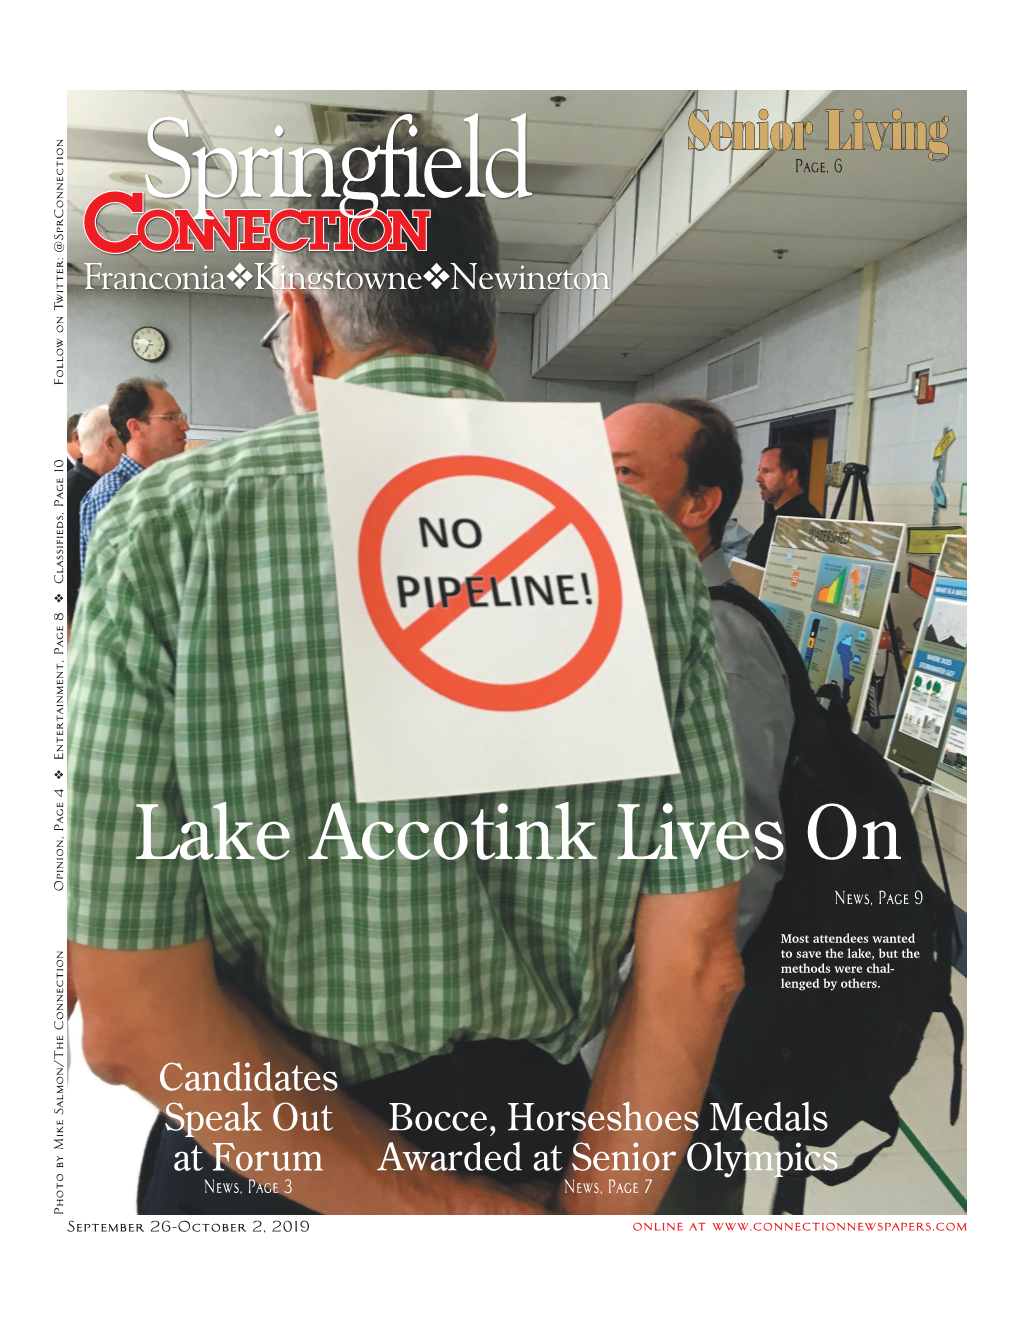 Lake Accotink Lives on Classifieds, Page 10 Opinion, Page 4 V Entertainment, 8 Classifieds, News, Page 9